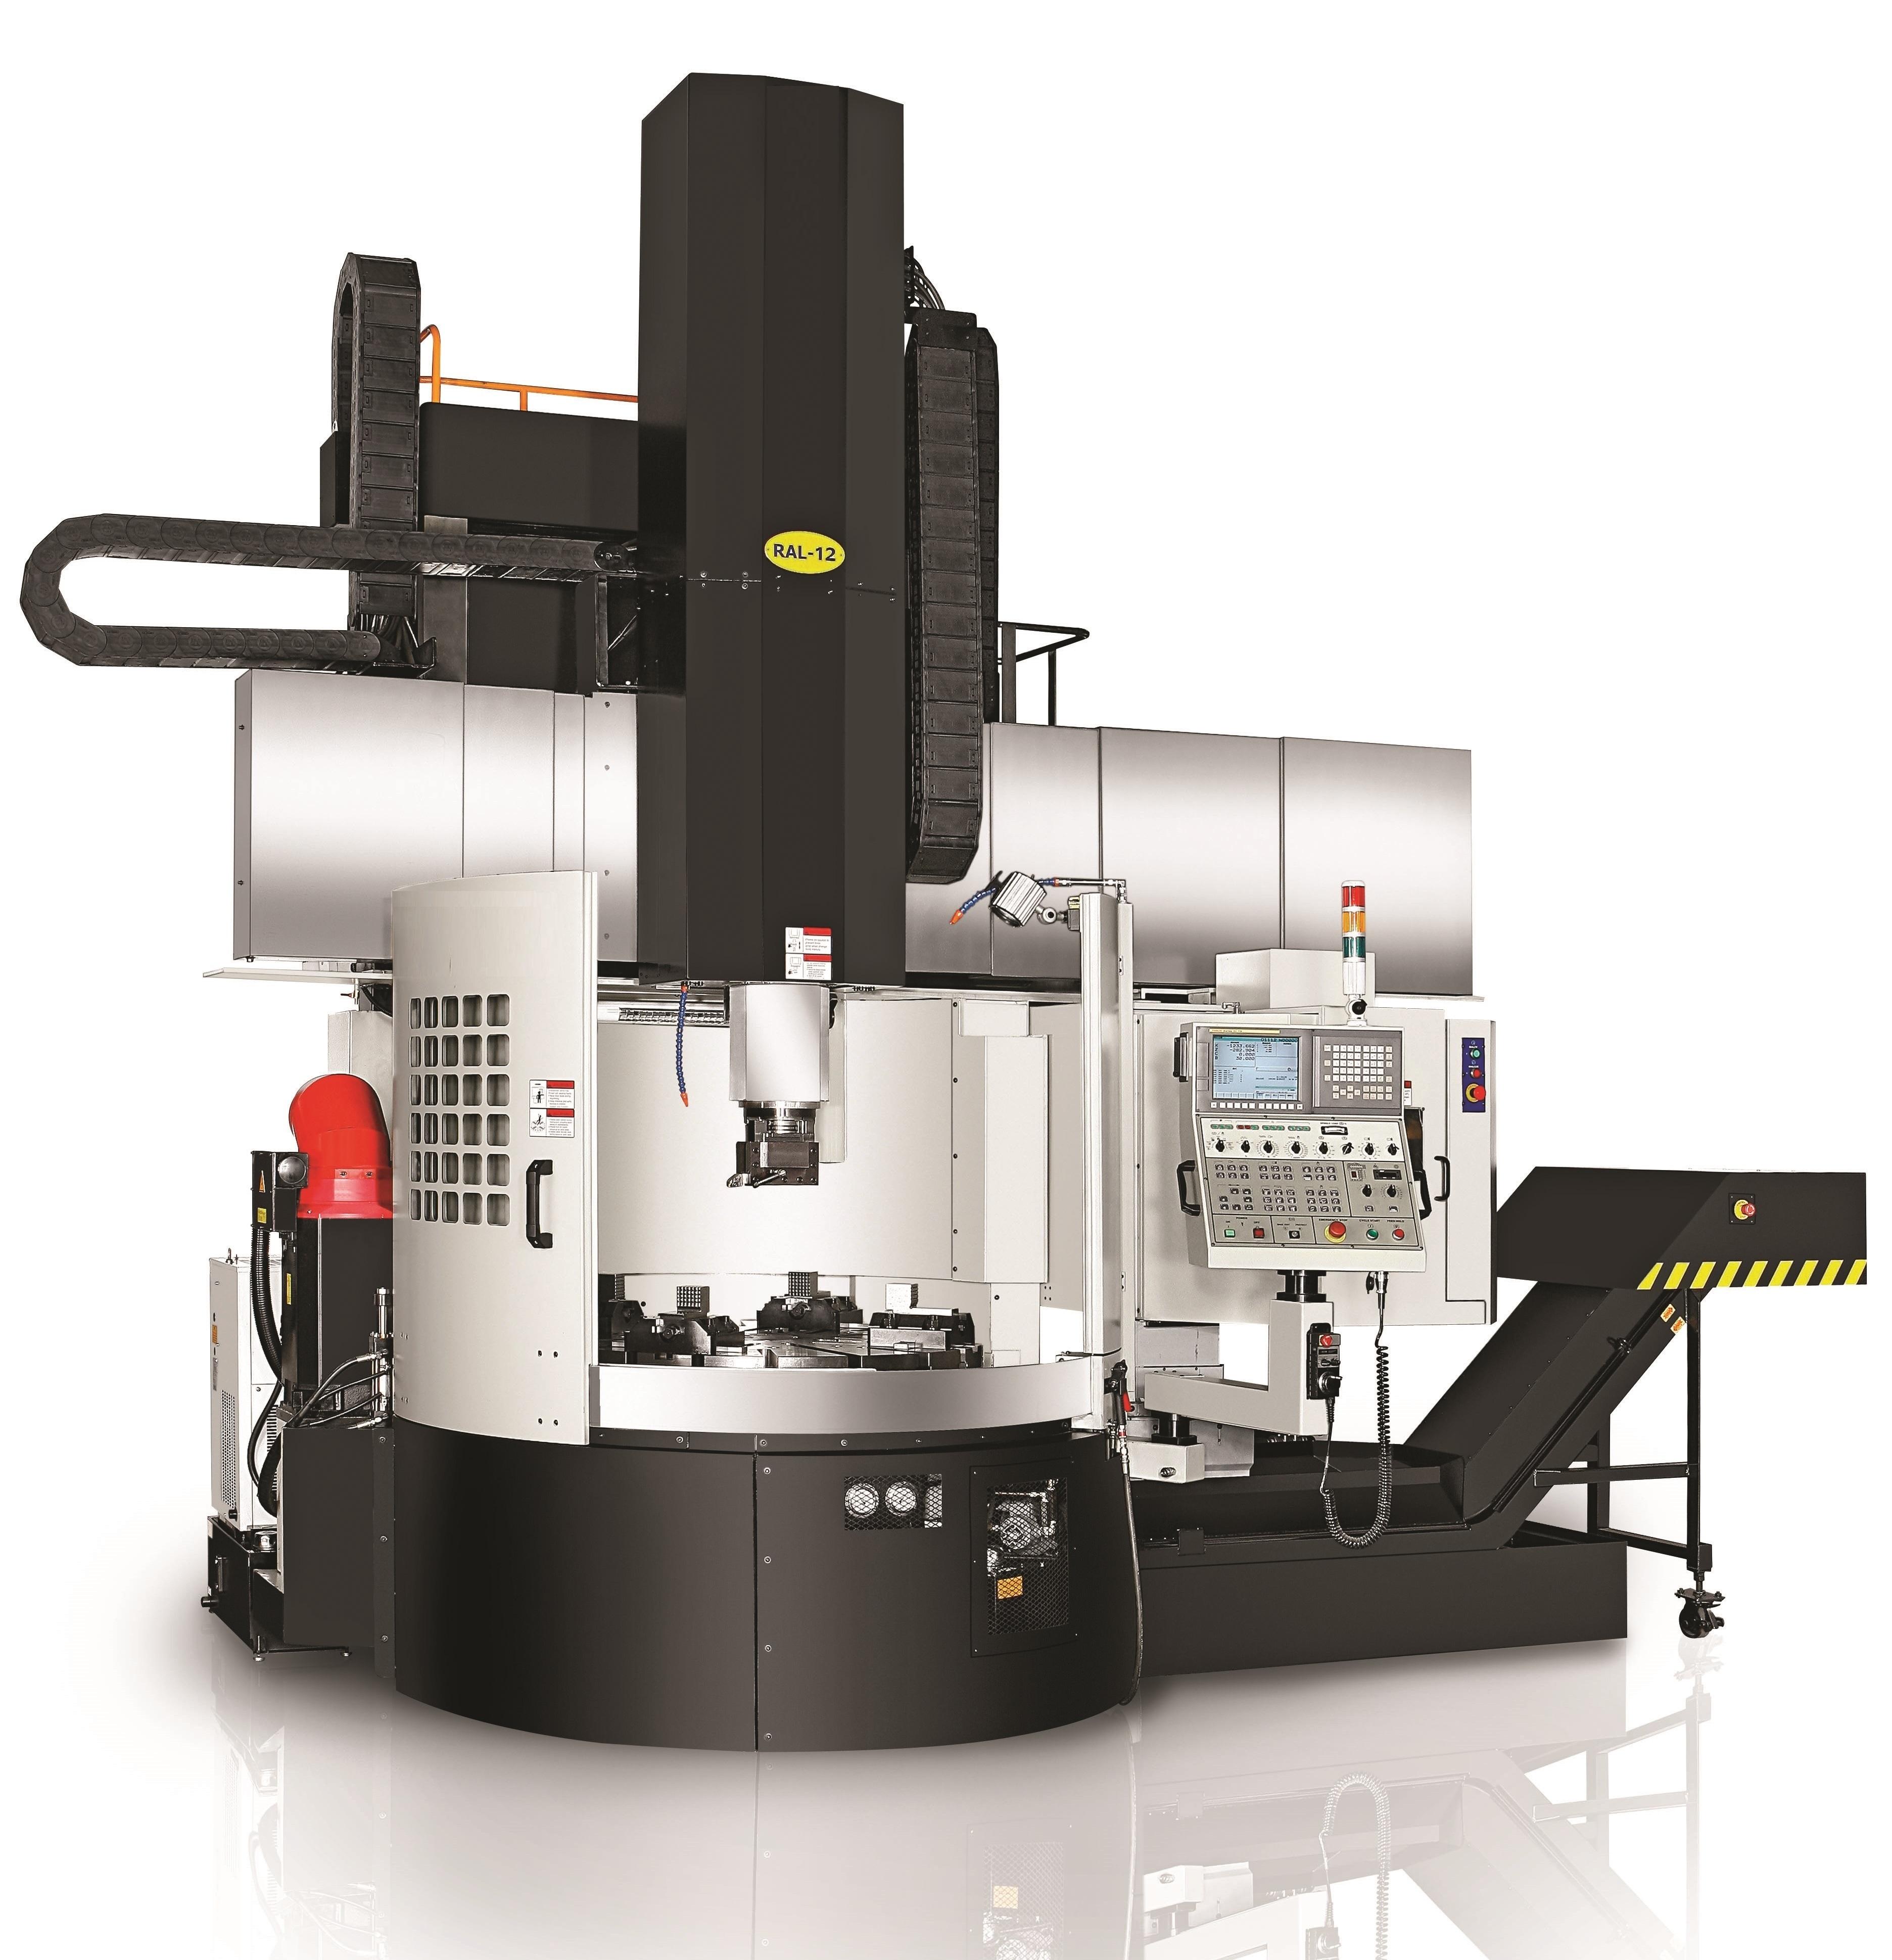 Product CNC Lathes | CNC RAL Vertical Turning Lathes | Broadbent Stanley image